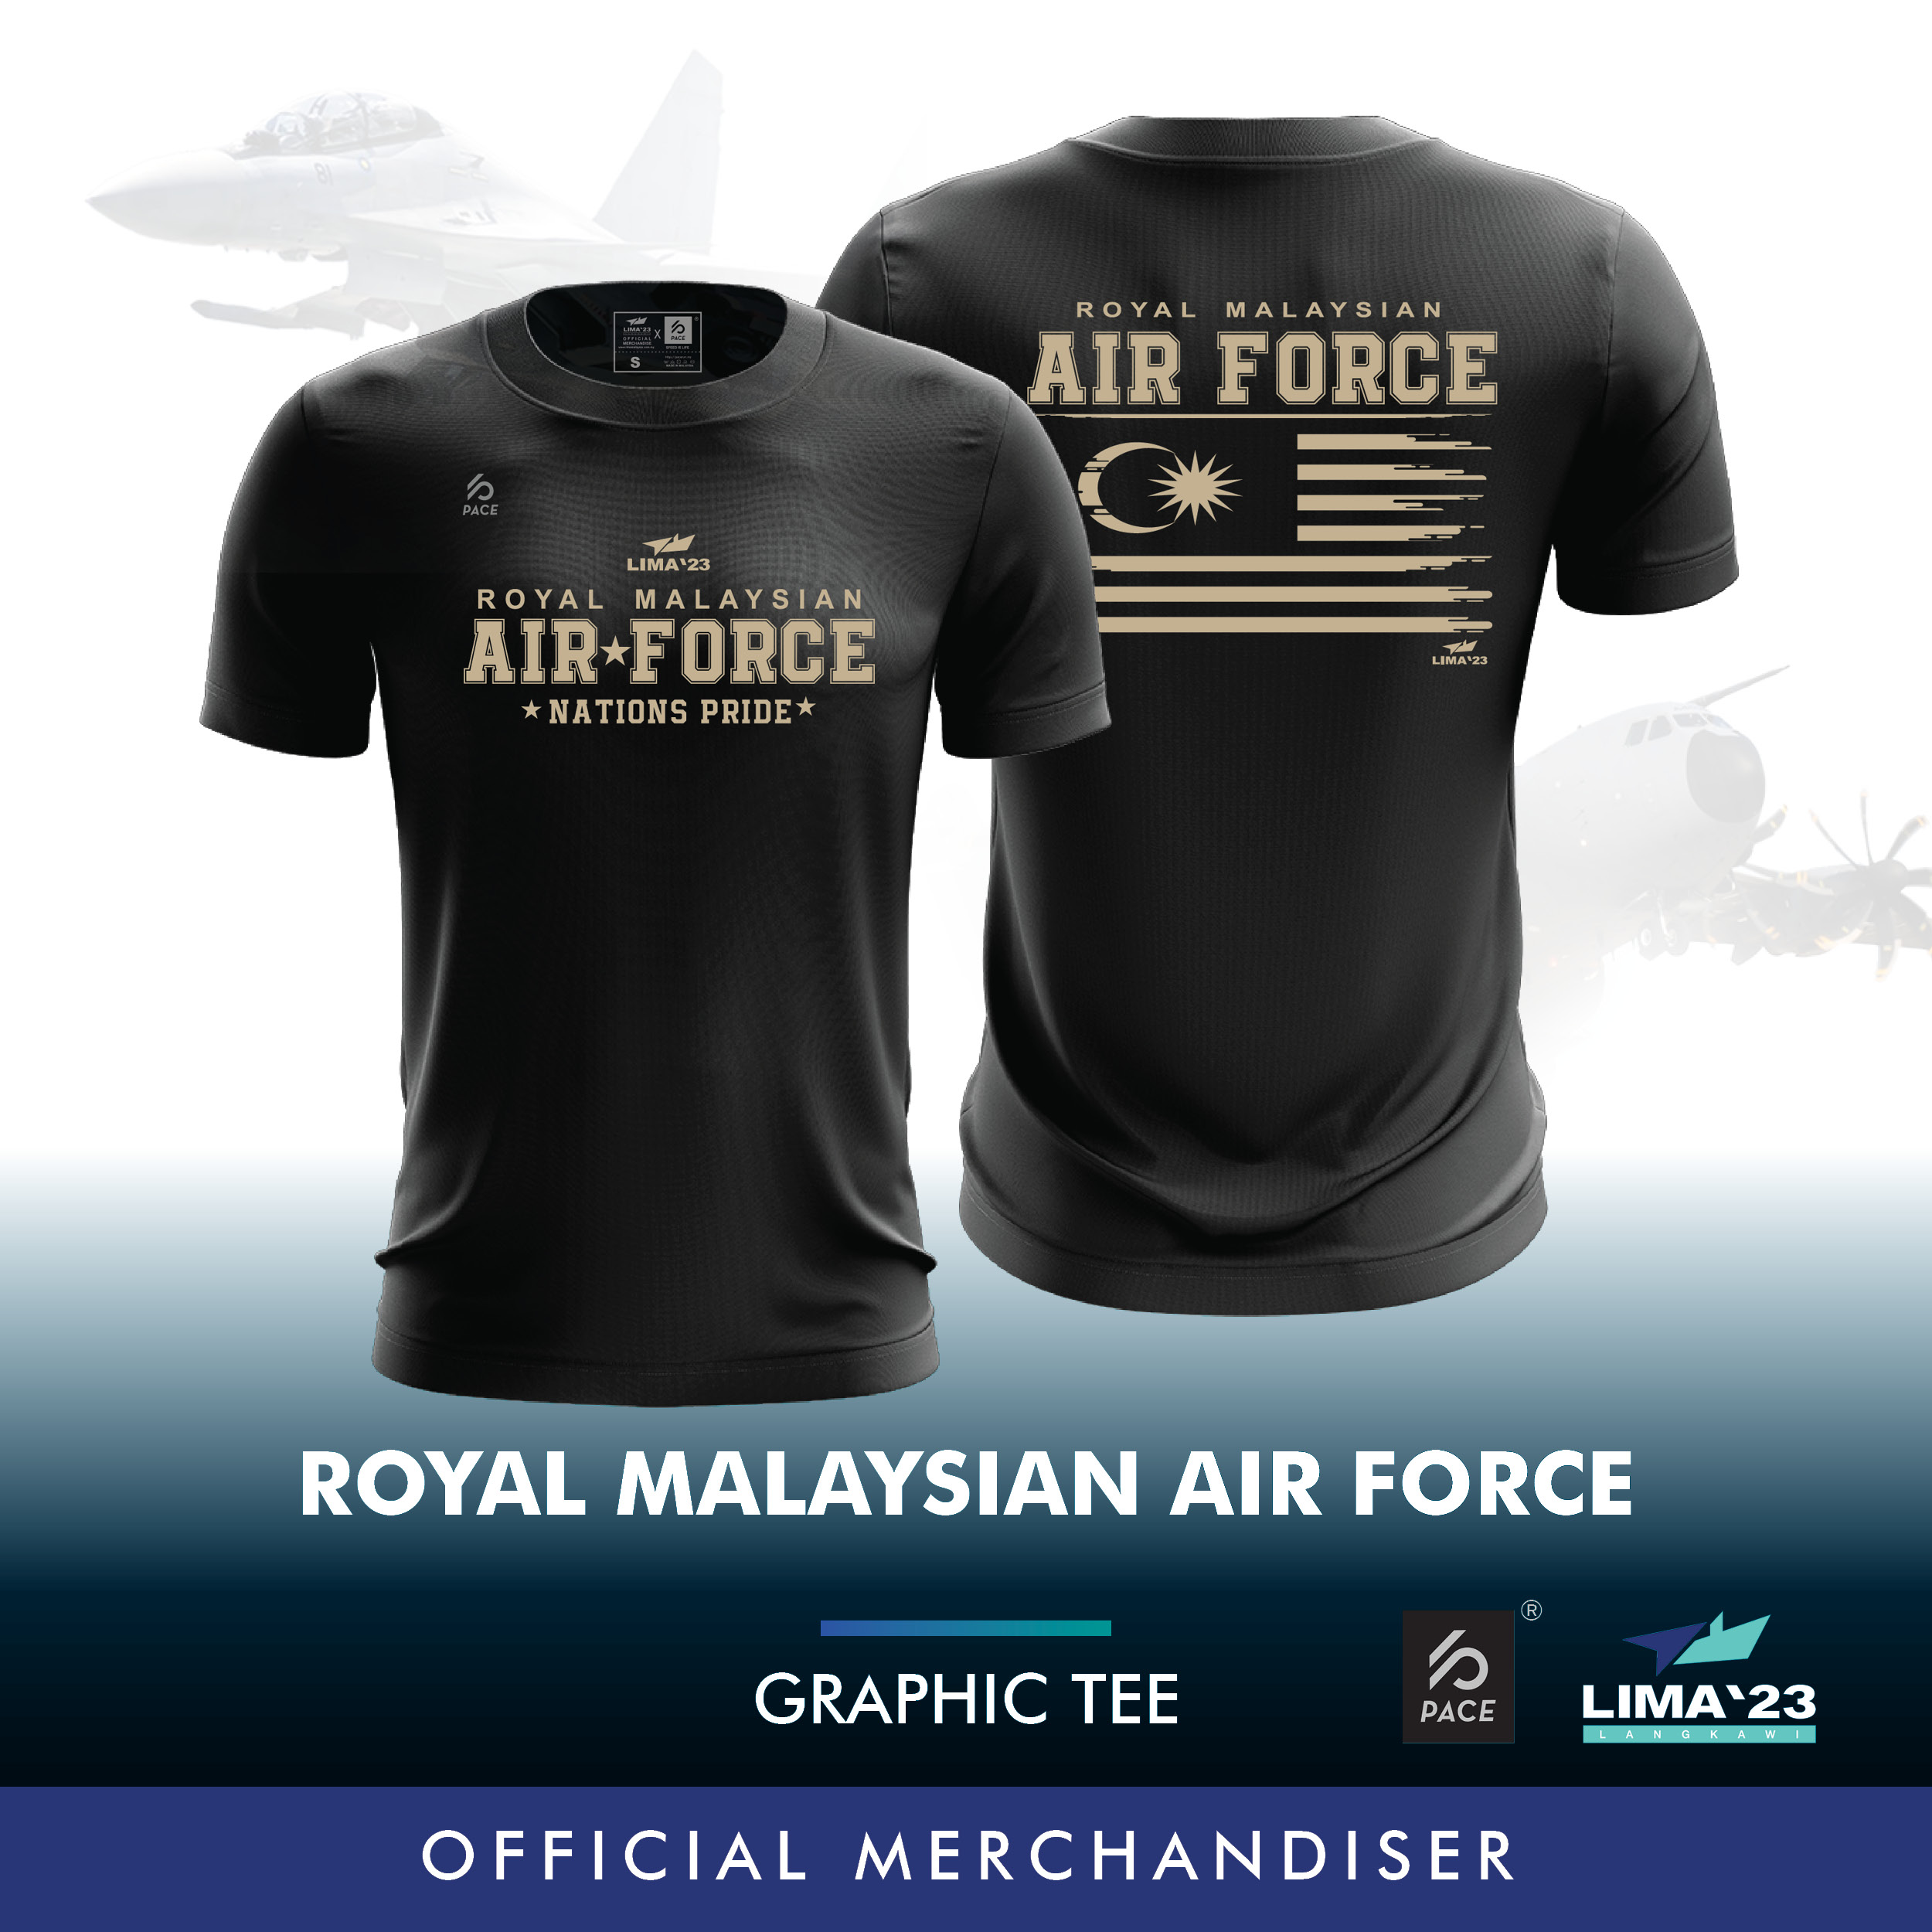 LIMA23 Graphic Tee Air Force 